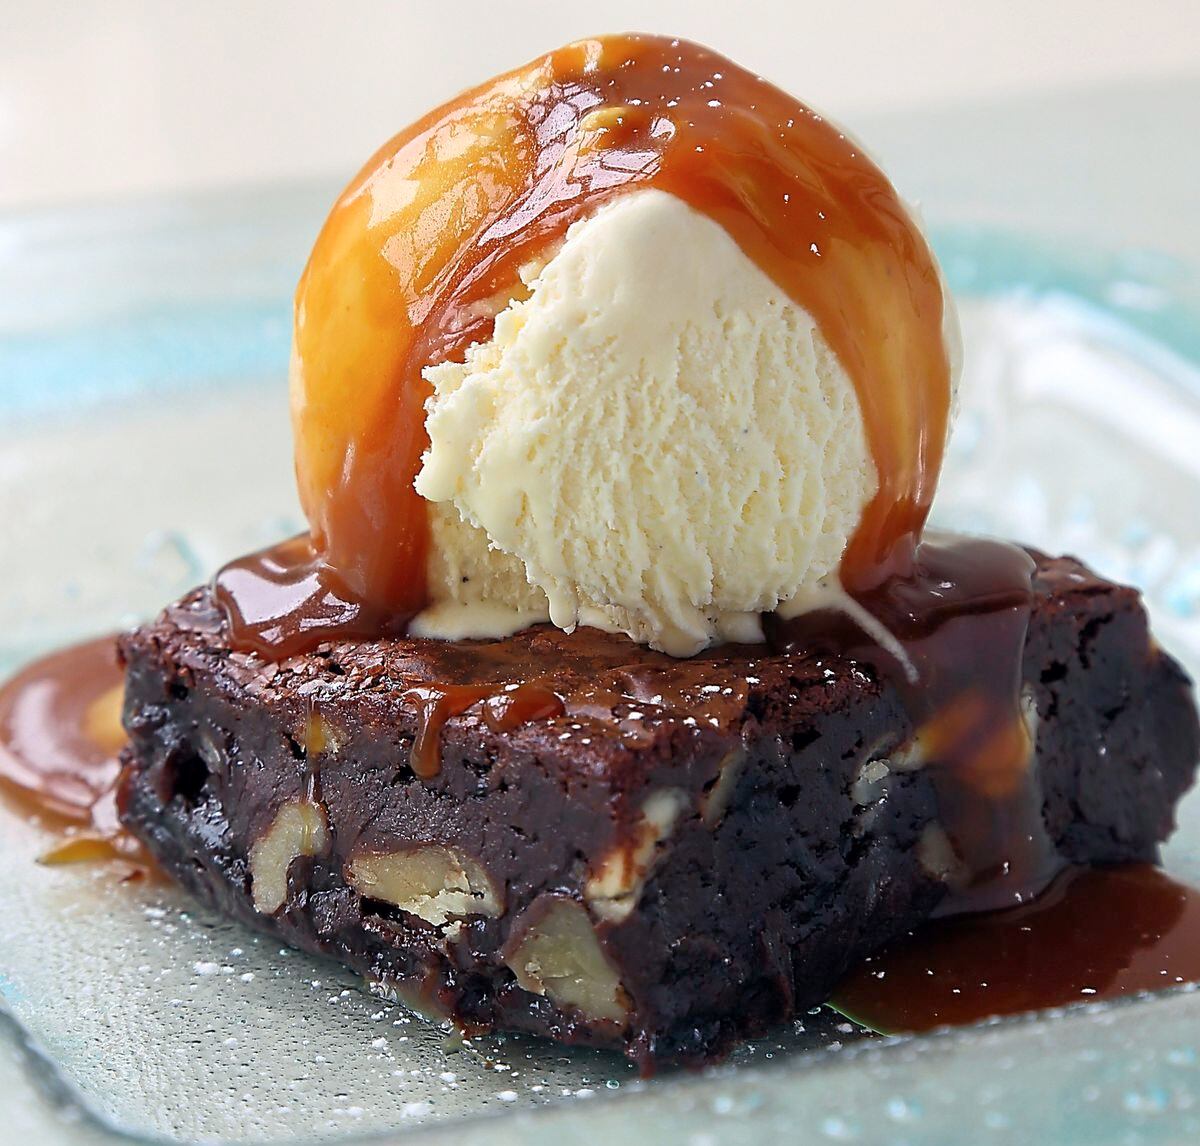 Walnut and Armagnac chocloate brownie with salted caramel & vanilla ice cream